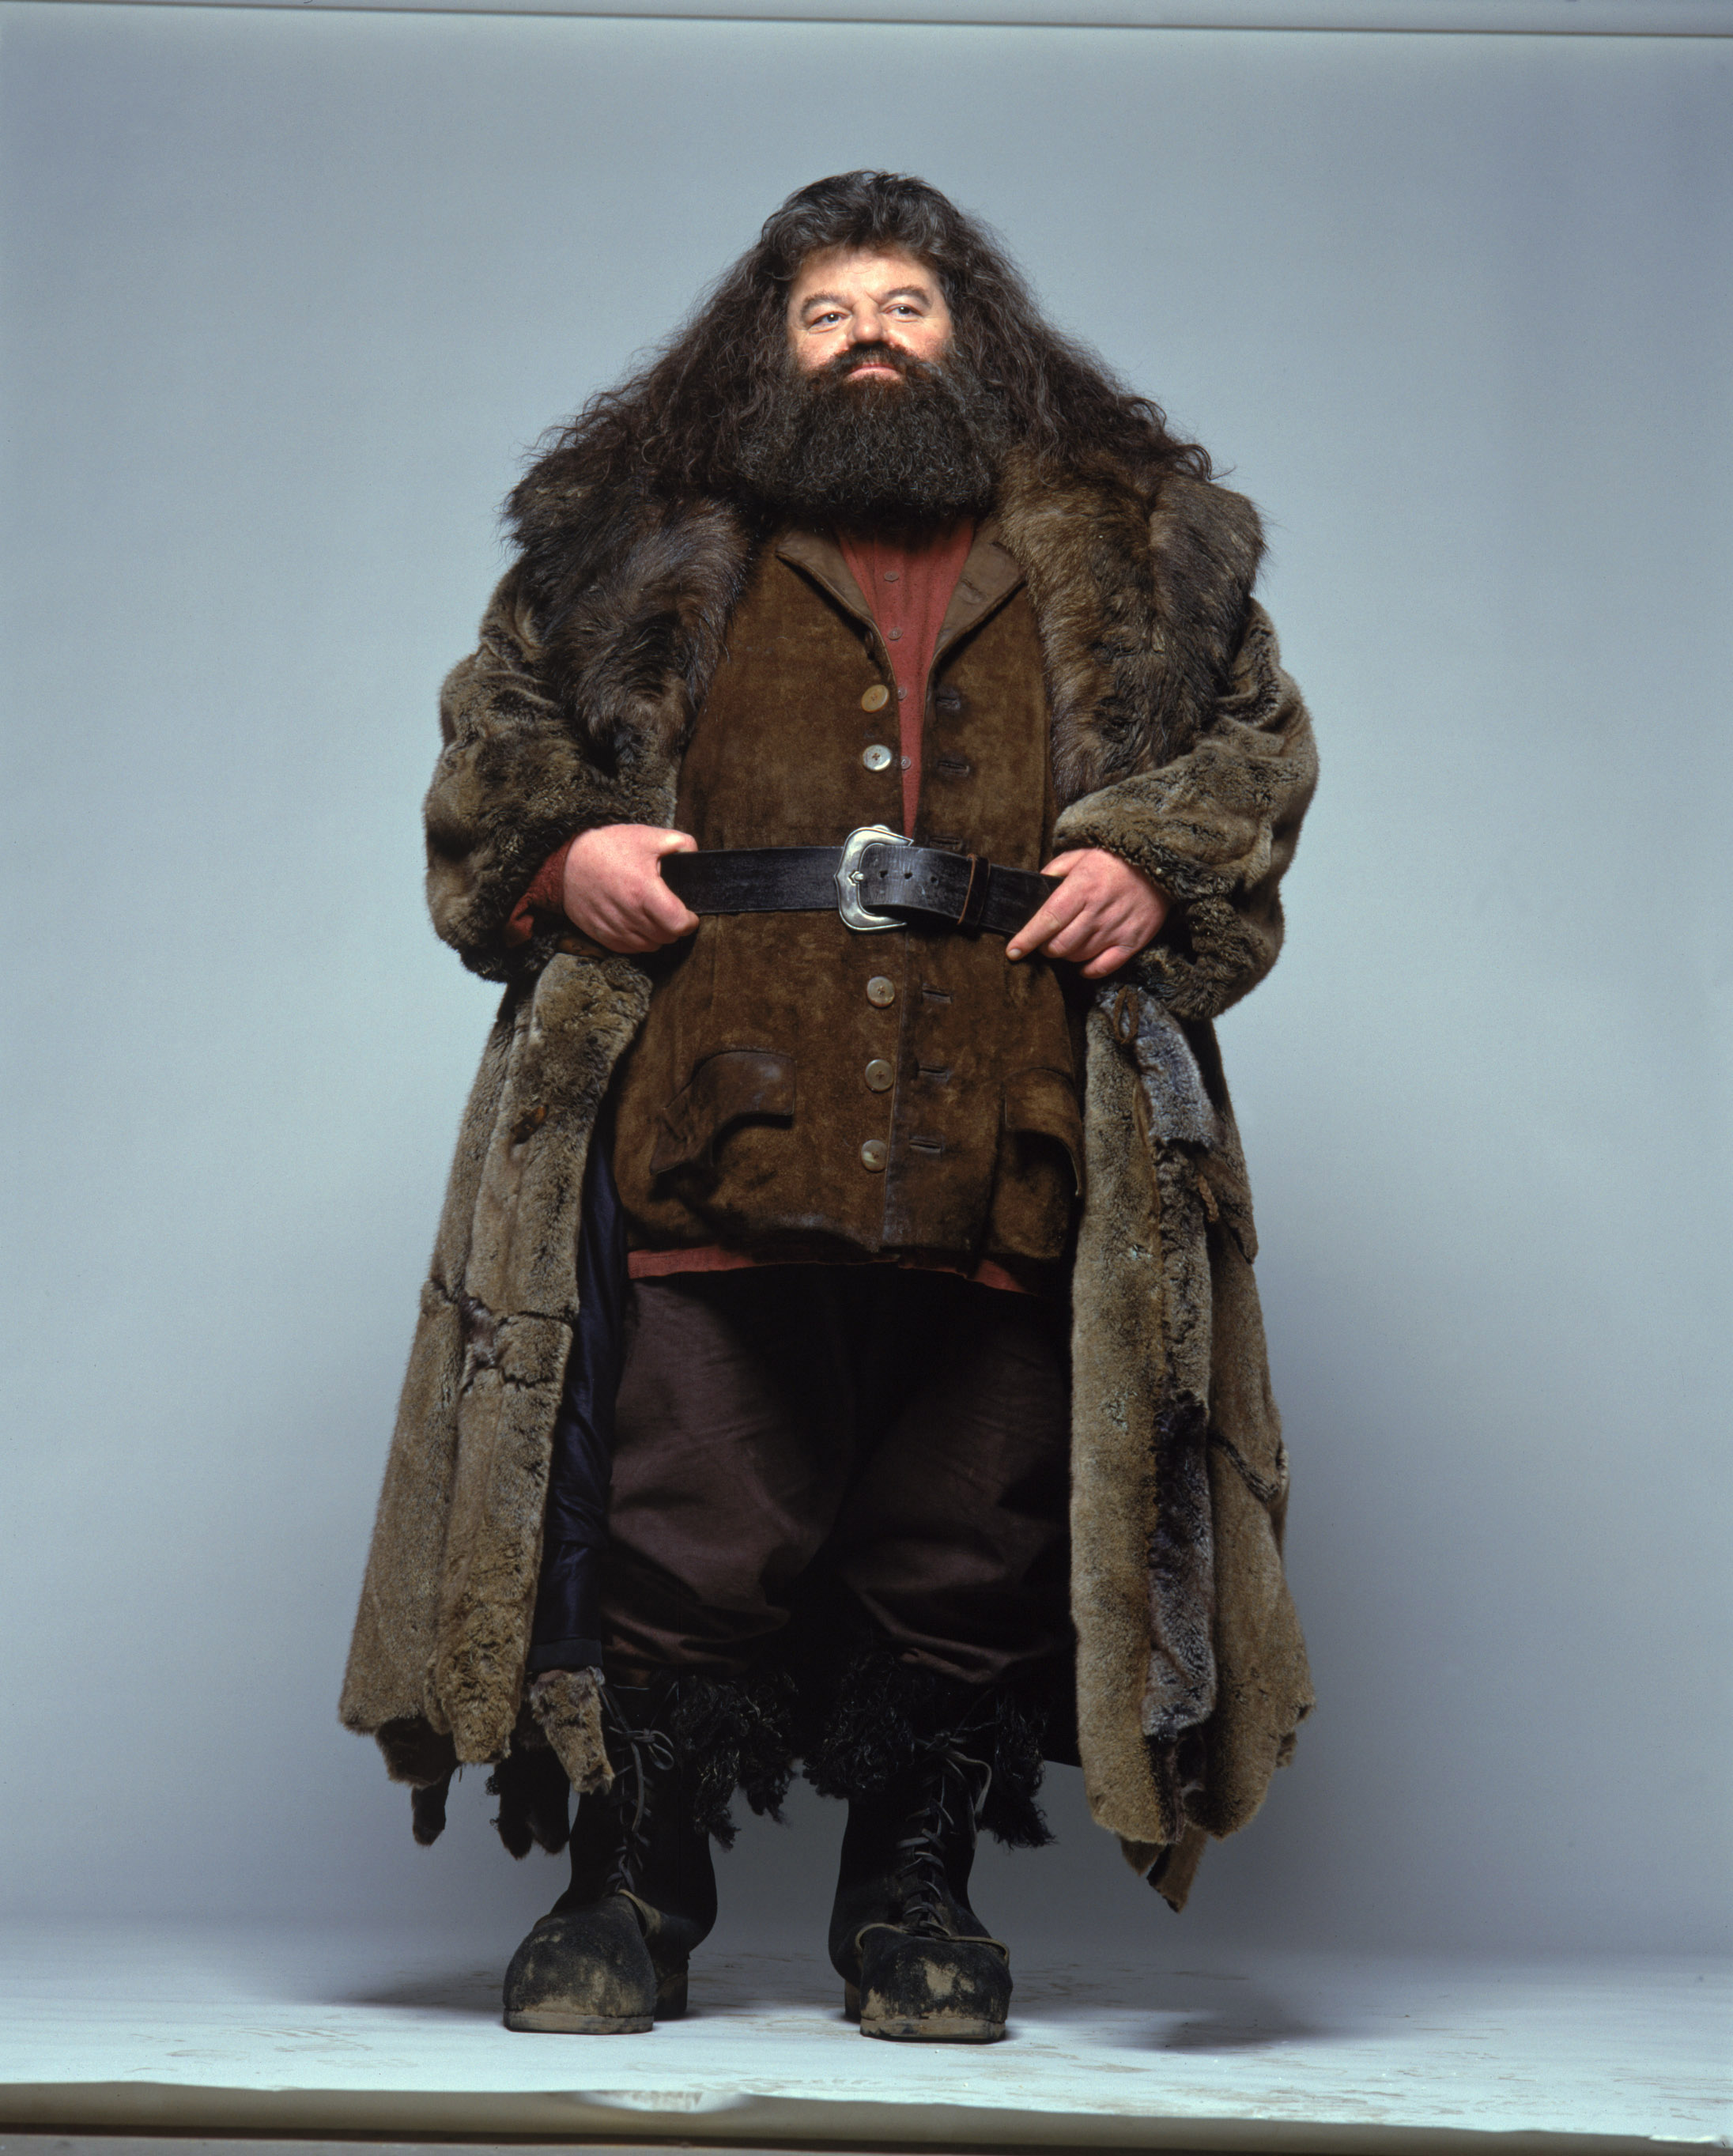 Robbie Coltrane in costume as Hagrid for Harry Potter and The Philosophers Stone